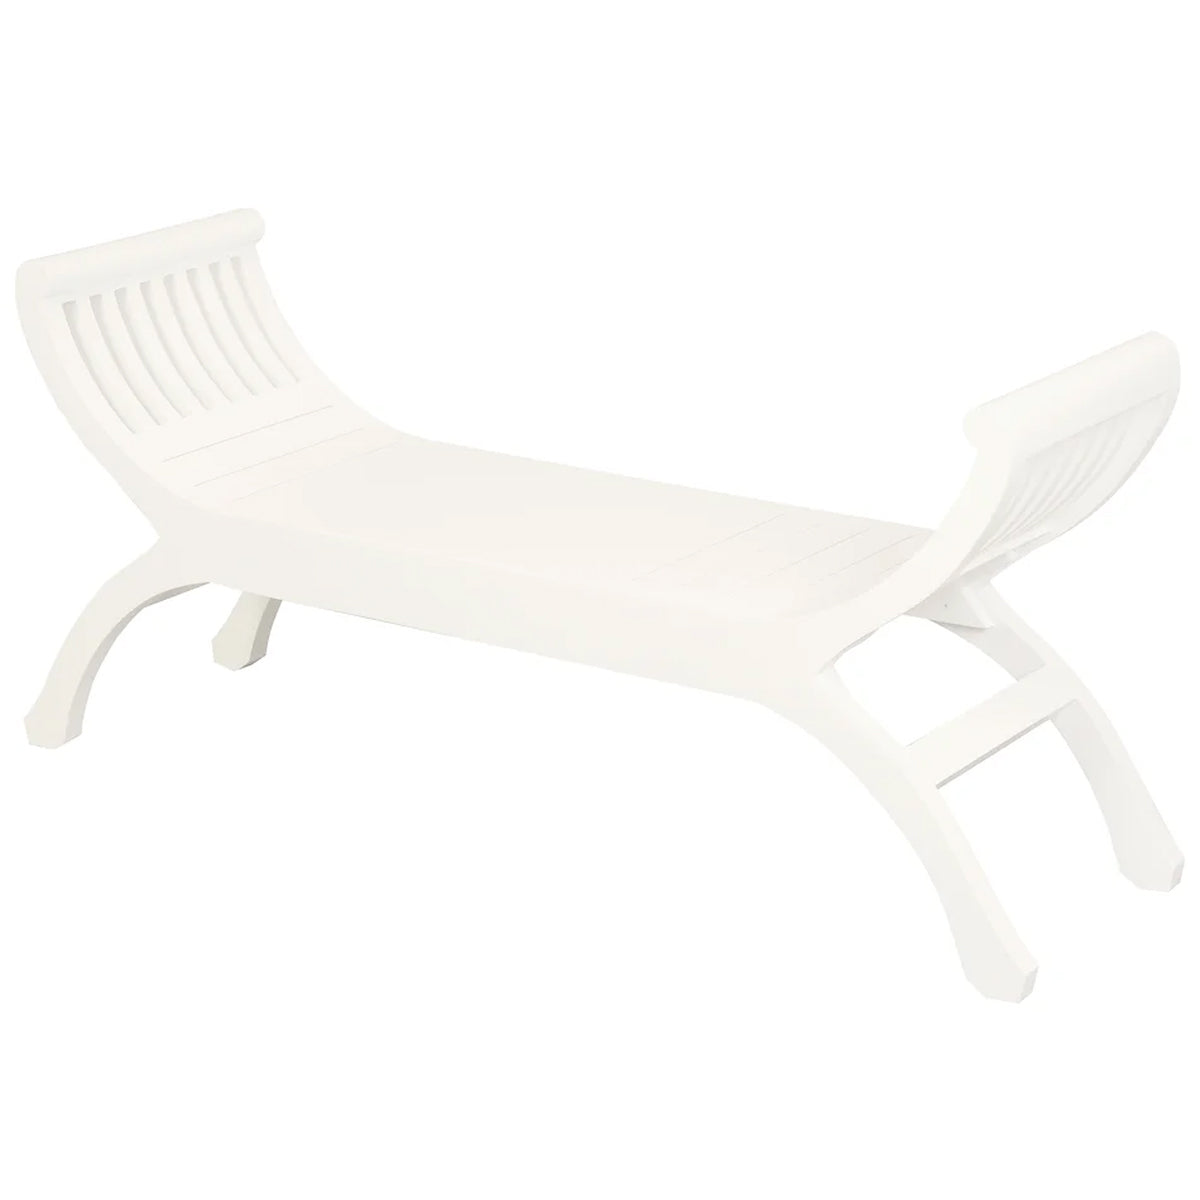 Maeve Timber 2 Seater Curved Bench - White